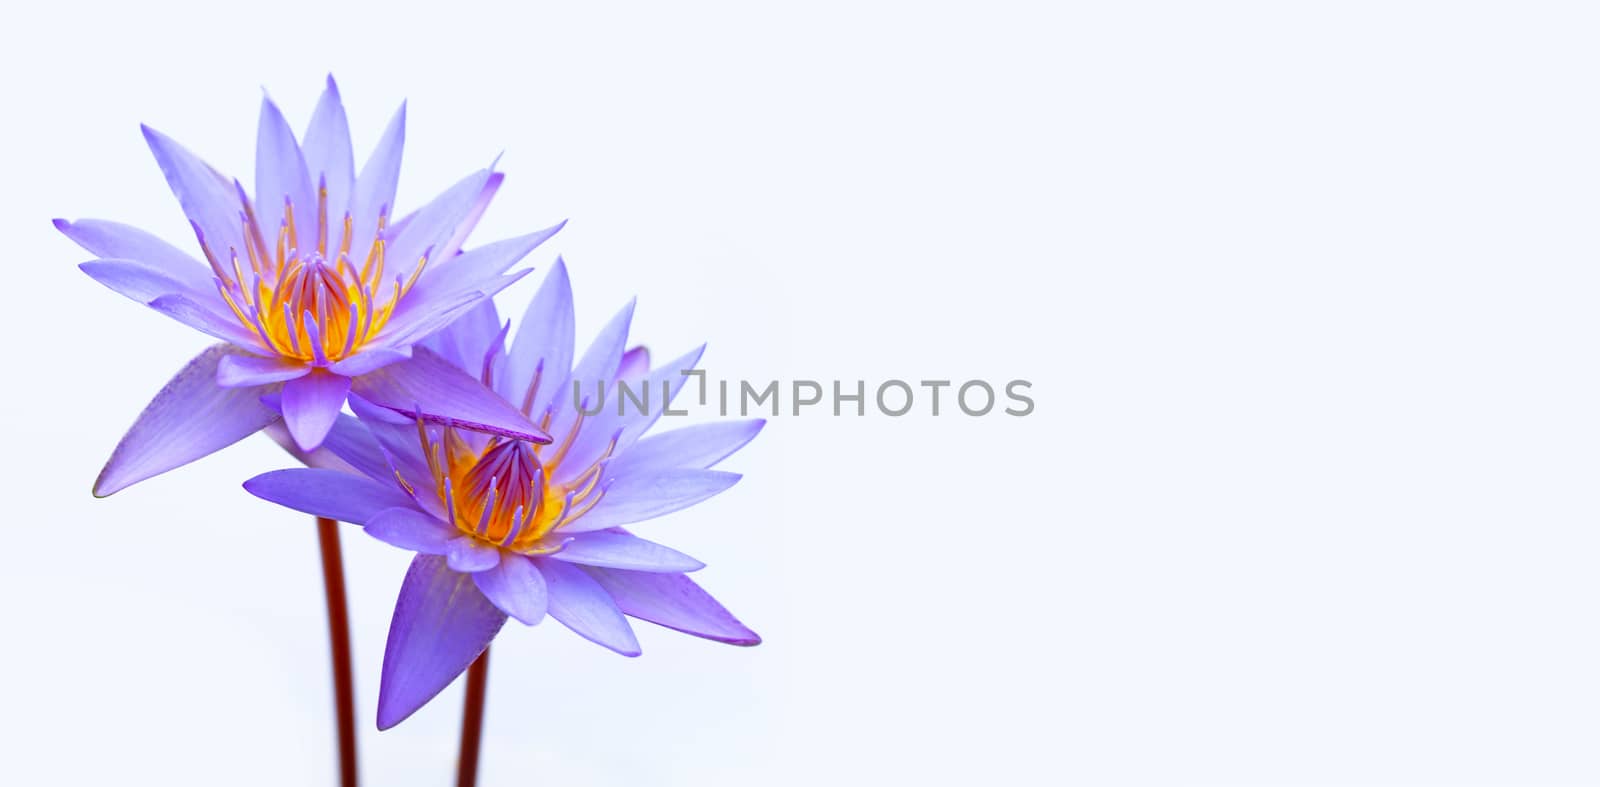 Purple water lilies, Violet lotus blooming on white background.  by Bowonpat